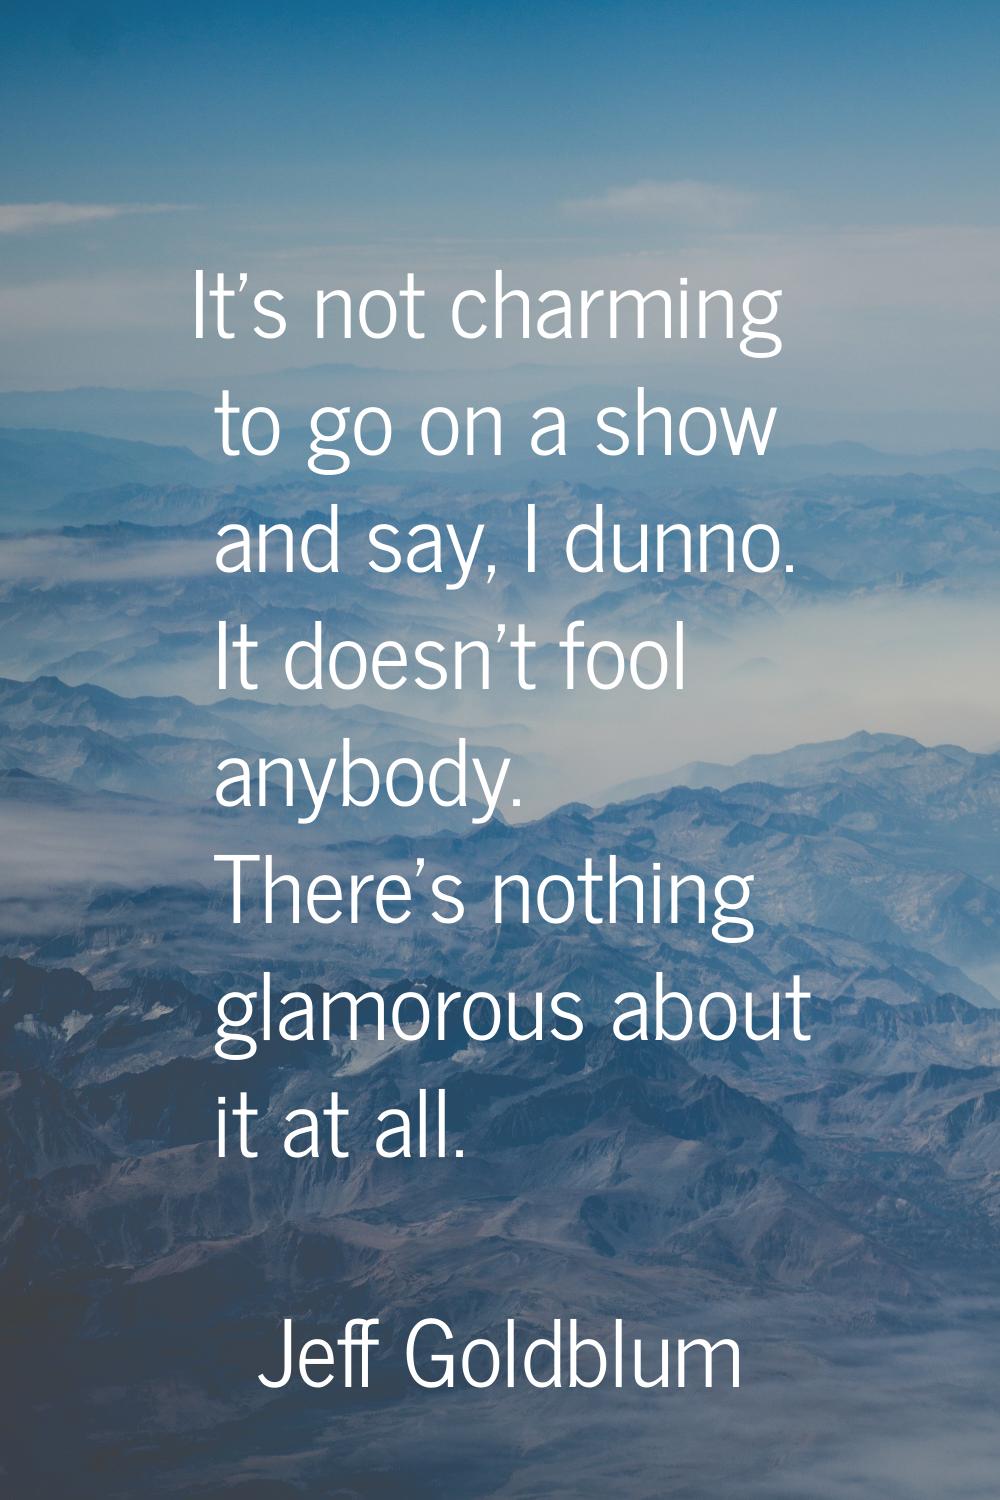 It's not charming to go on a show and say, I dunno. It doesn't fool anybody. There's nothing glamor